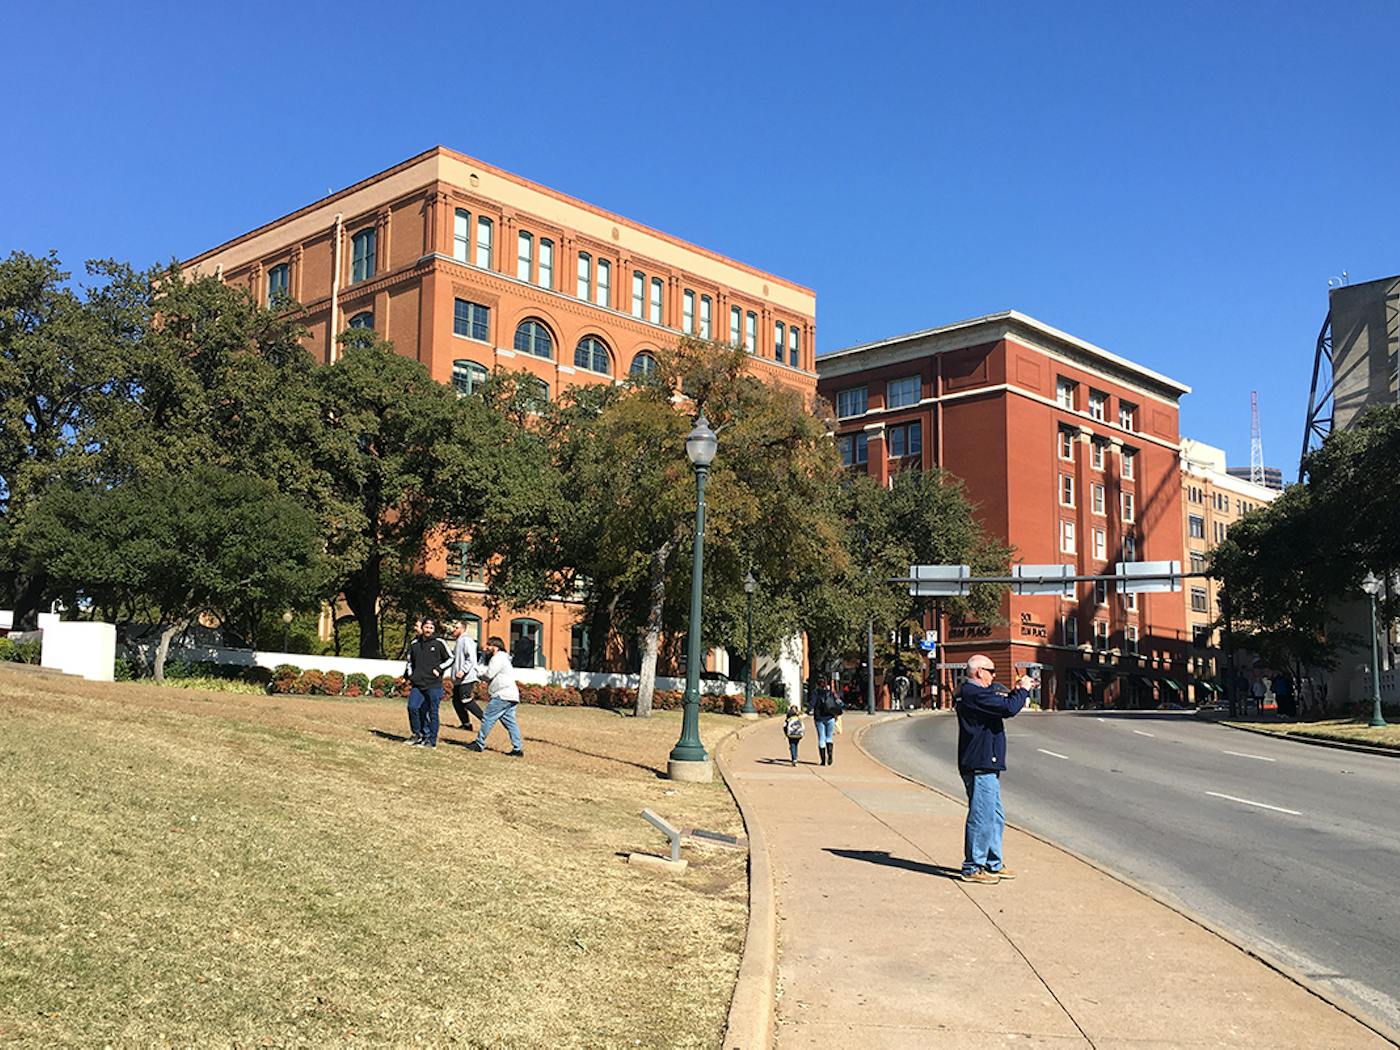 JFK's Assassination Only Grows More Distant at Dallas's Sixth Floor Museum – Texas Monthly